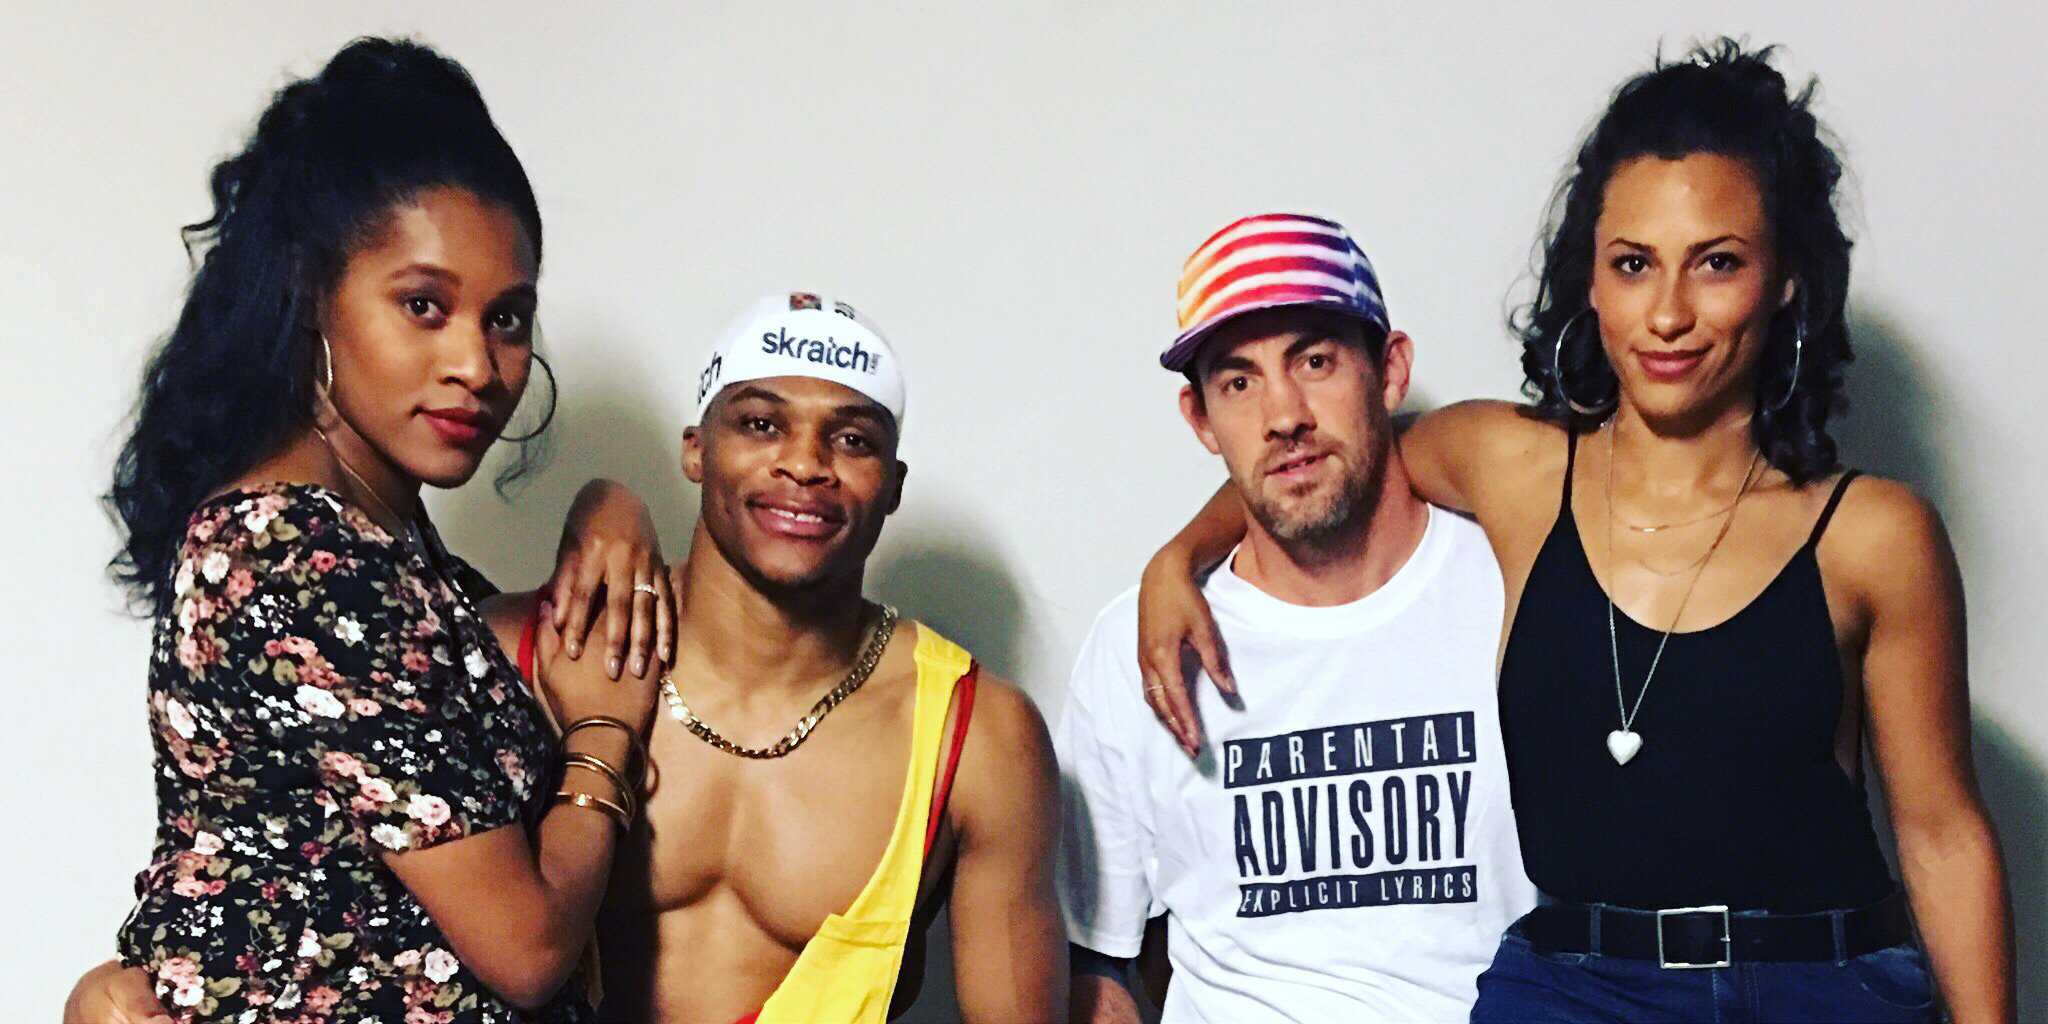 Russell Westbrook, Nick Collison might have already won any Halloween costume contest